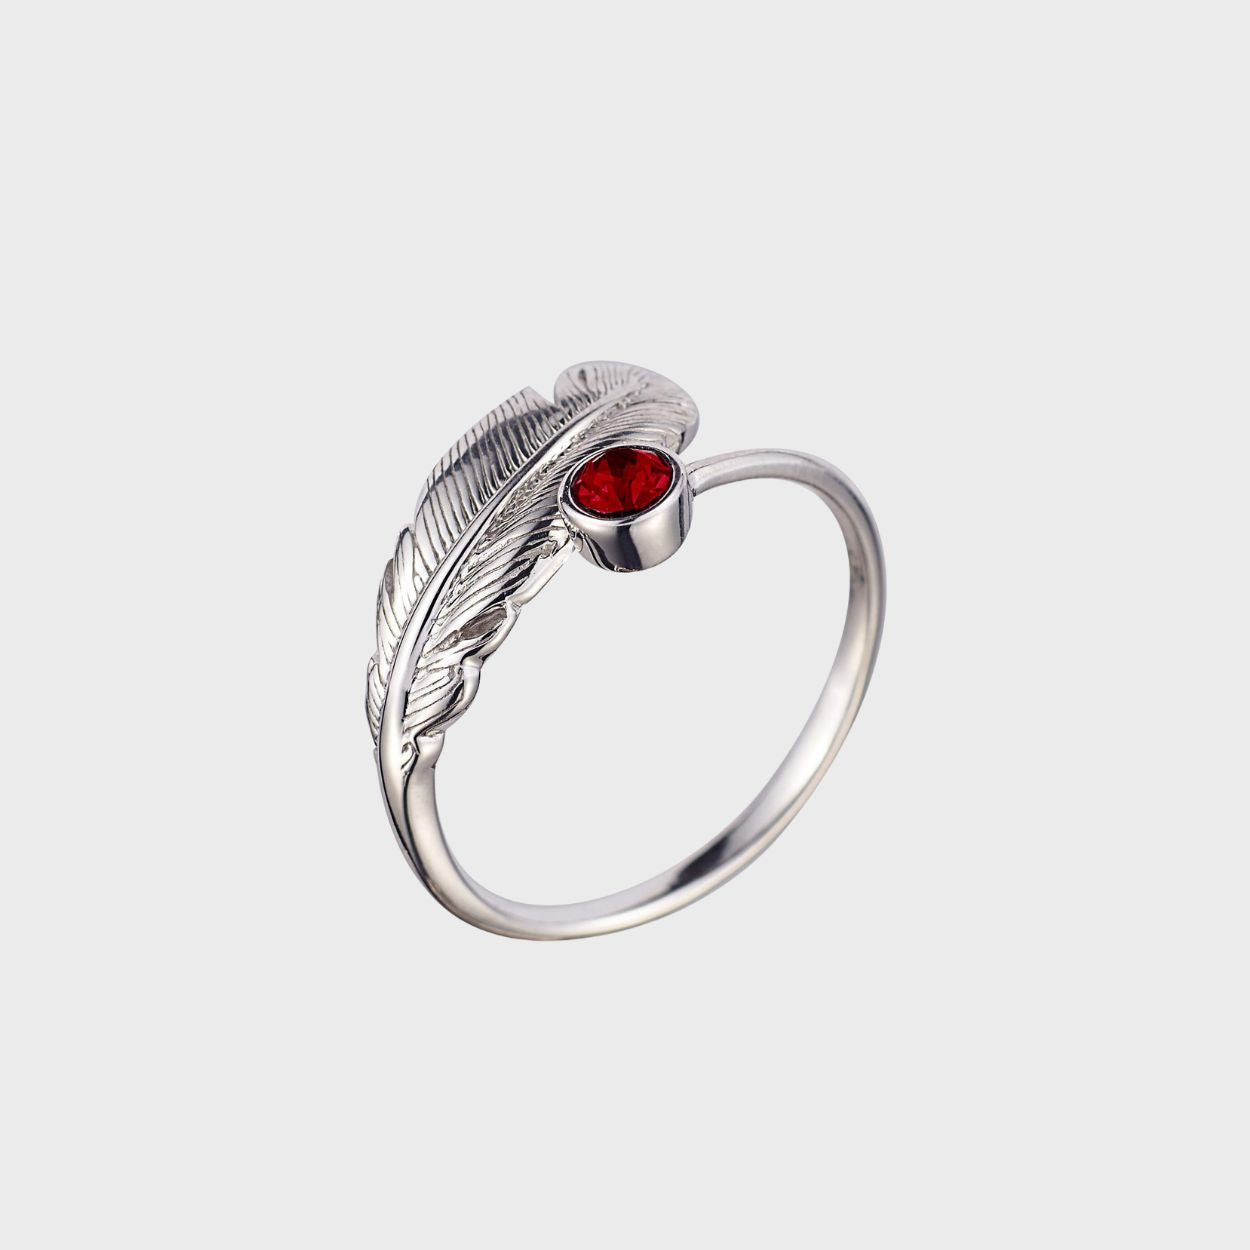 Adjustable Silver & Crystal Feather Birthstone Ring - July